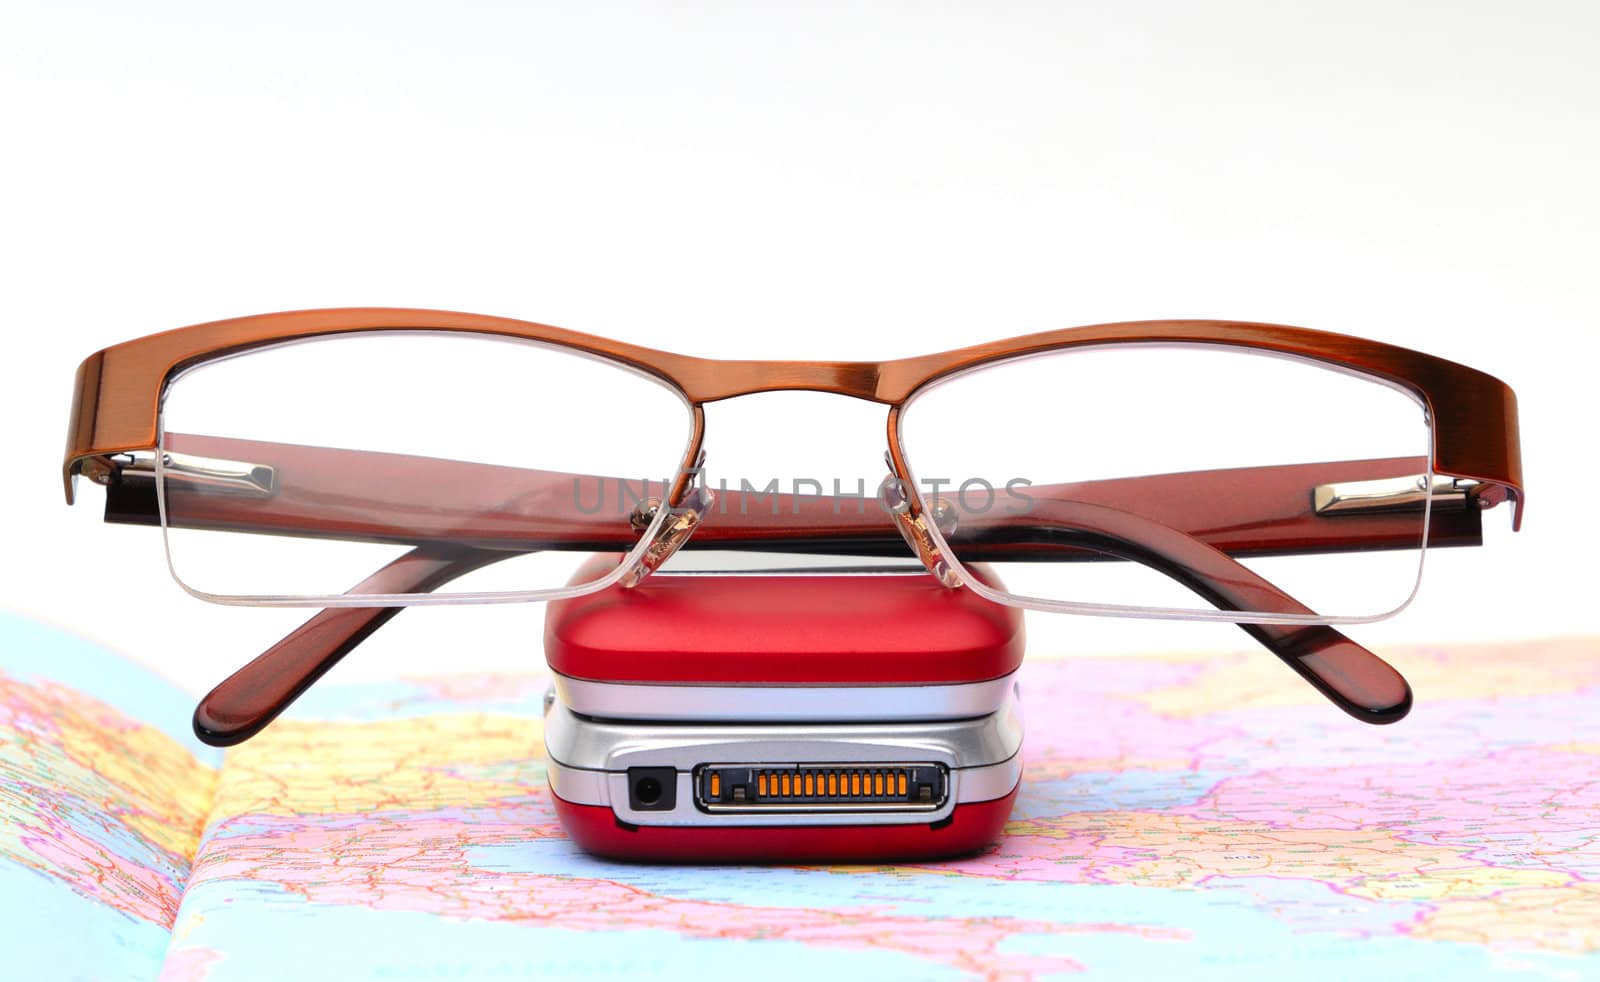 Modern glasses on telephone, background map and white